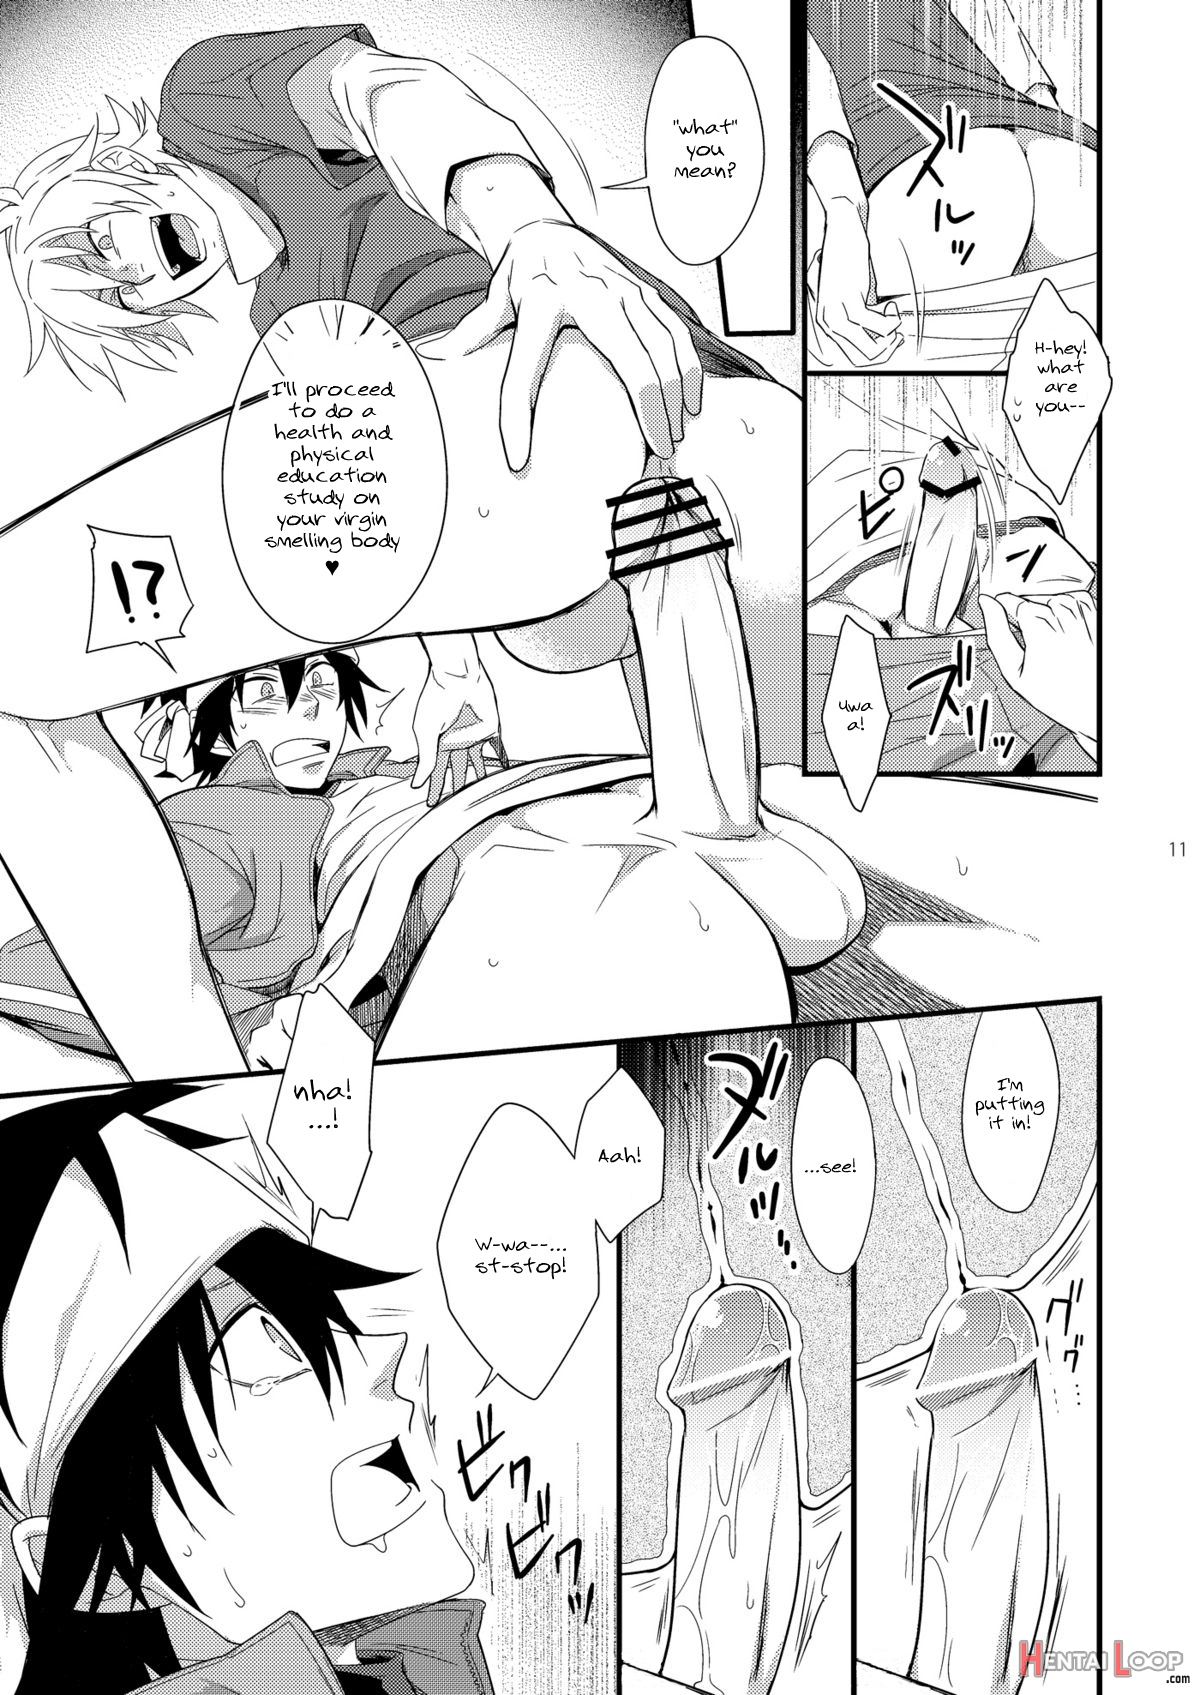 Hajime-sensei And The Adult Health And Physical Education 2 page 10